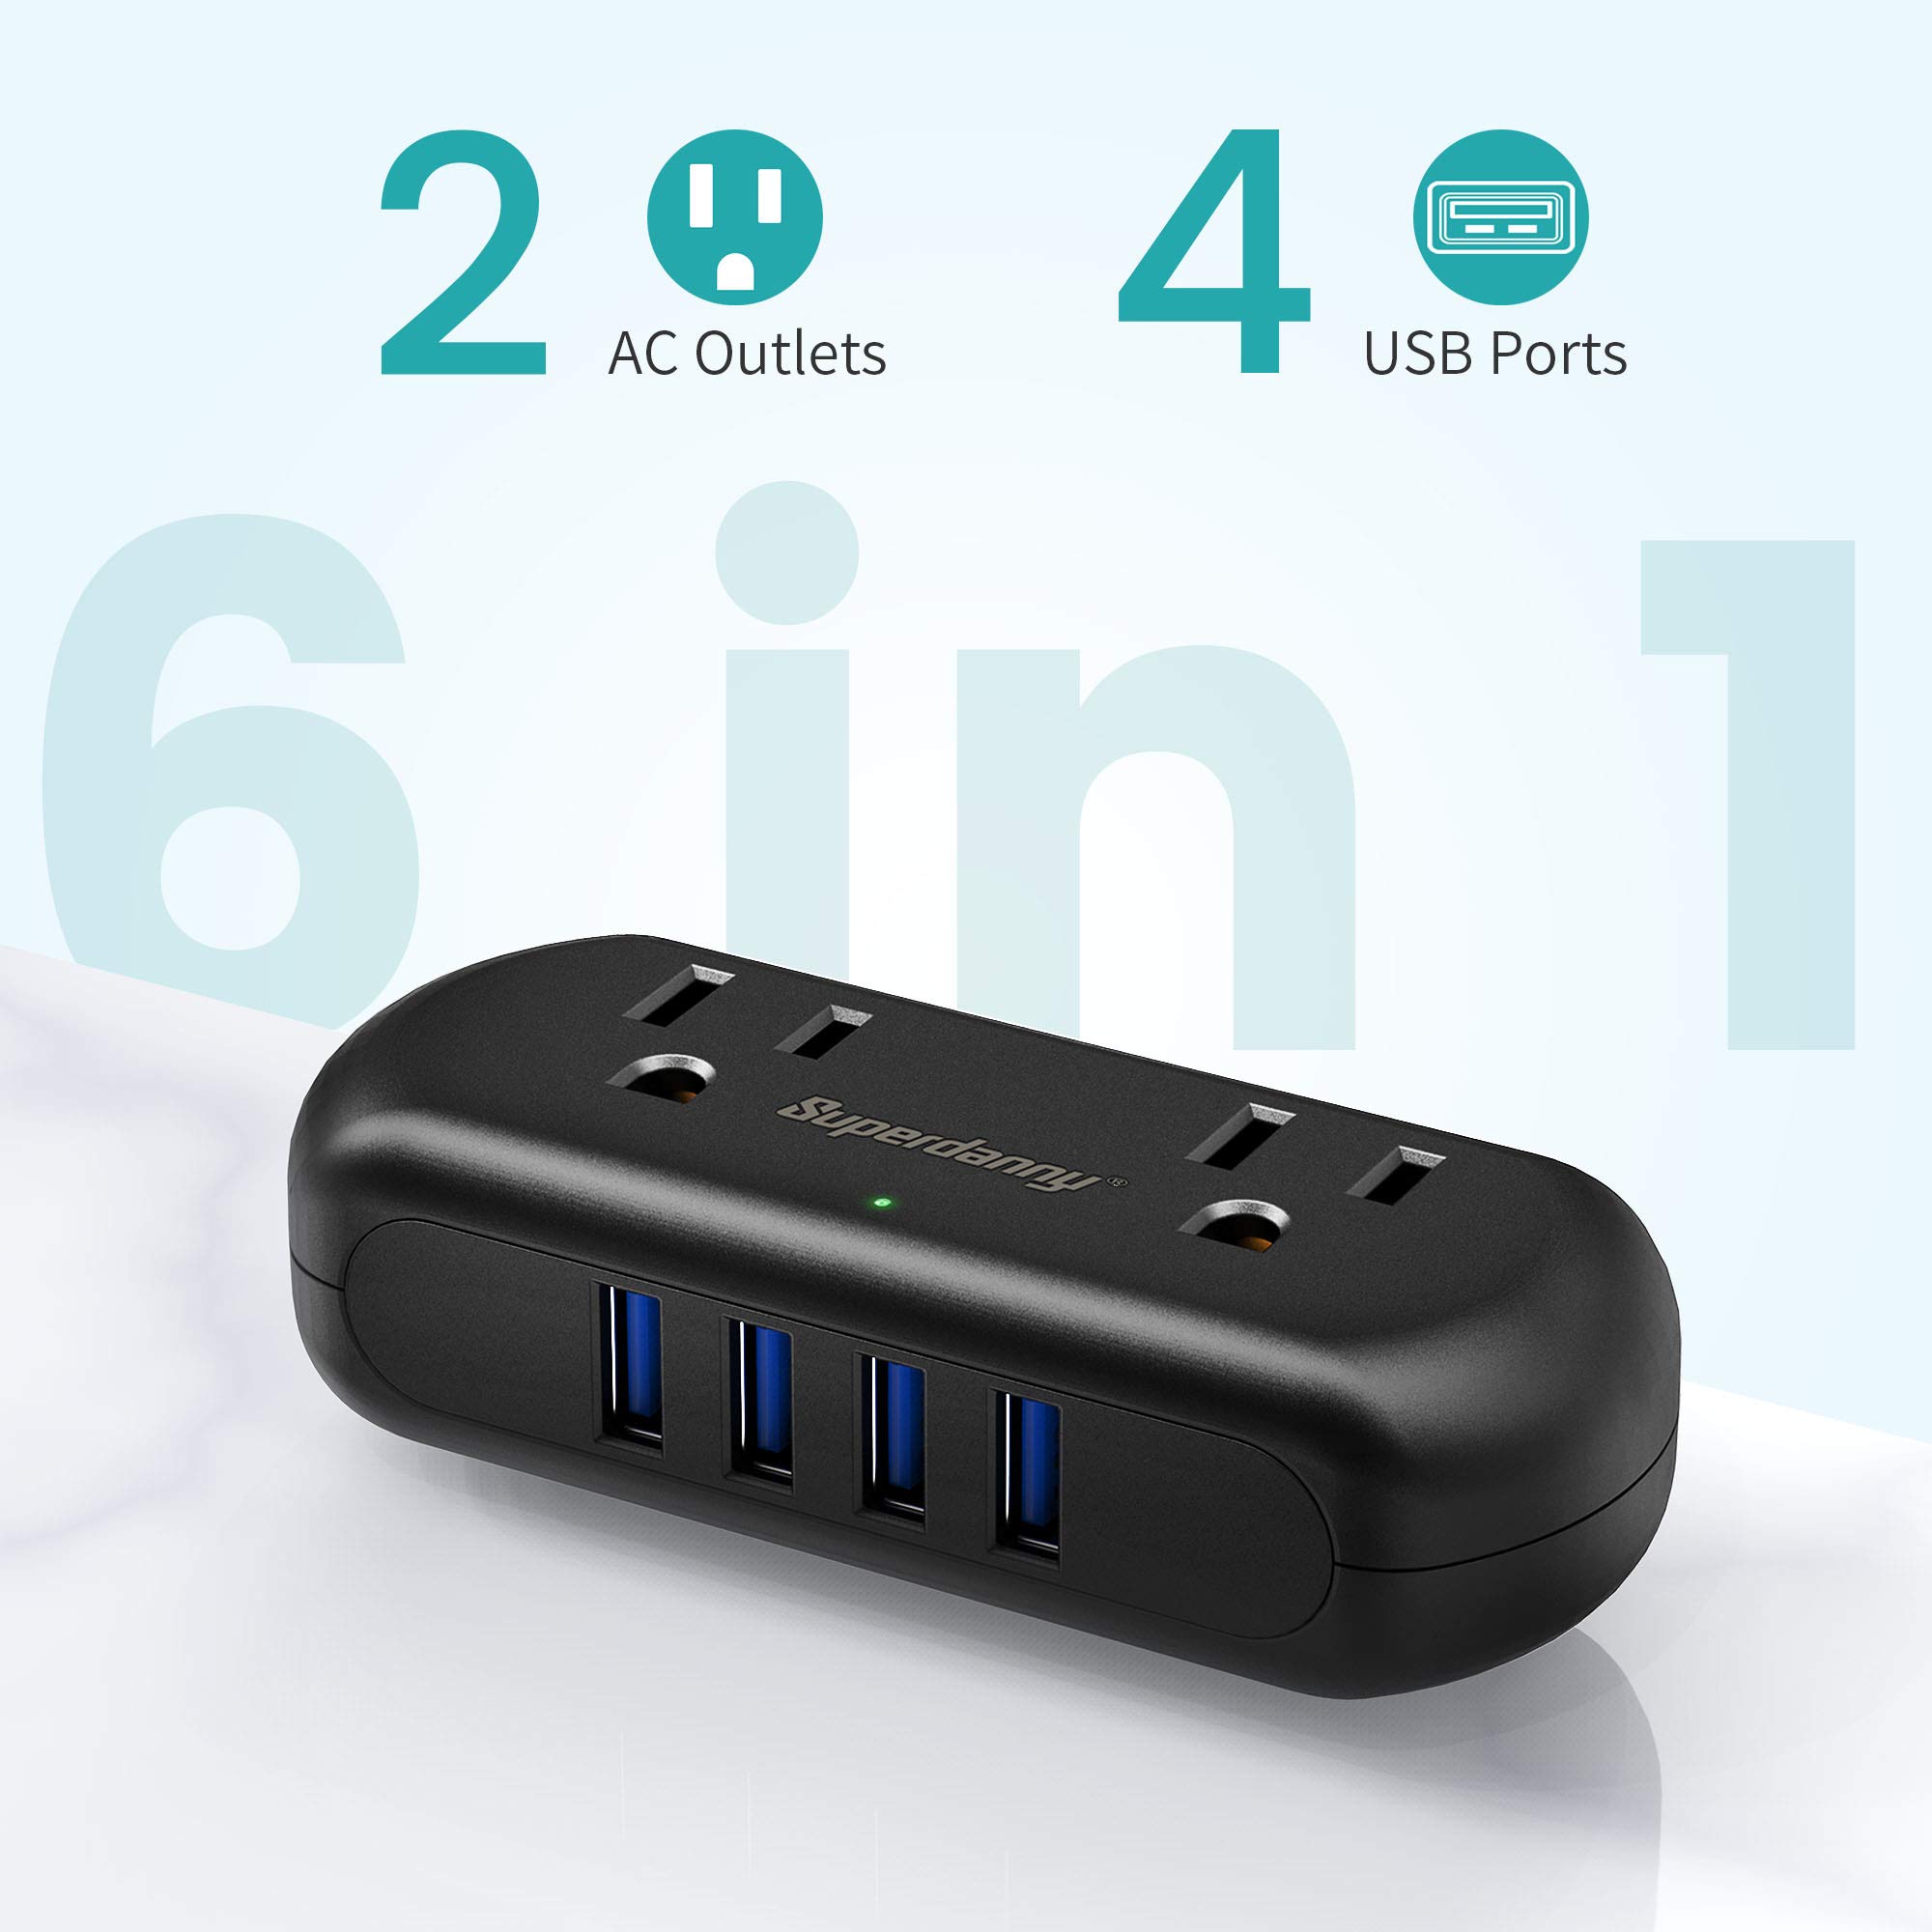 SUPERDANNY Mini Surge Protector with 2 Wide-Spaced Outlets & 4 USB Ports, Compact Size, Multi-Plug Outlet Extender for Travel, Home, Office, Black